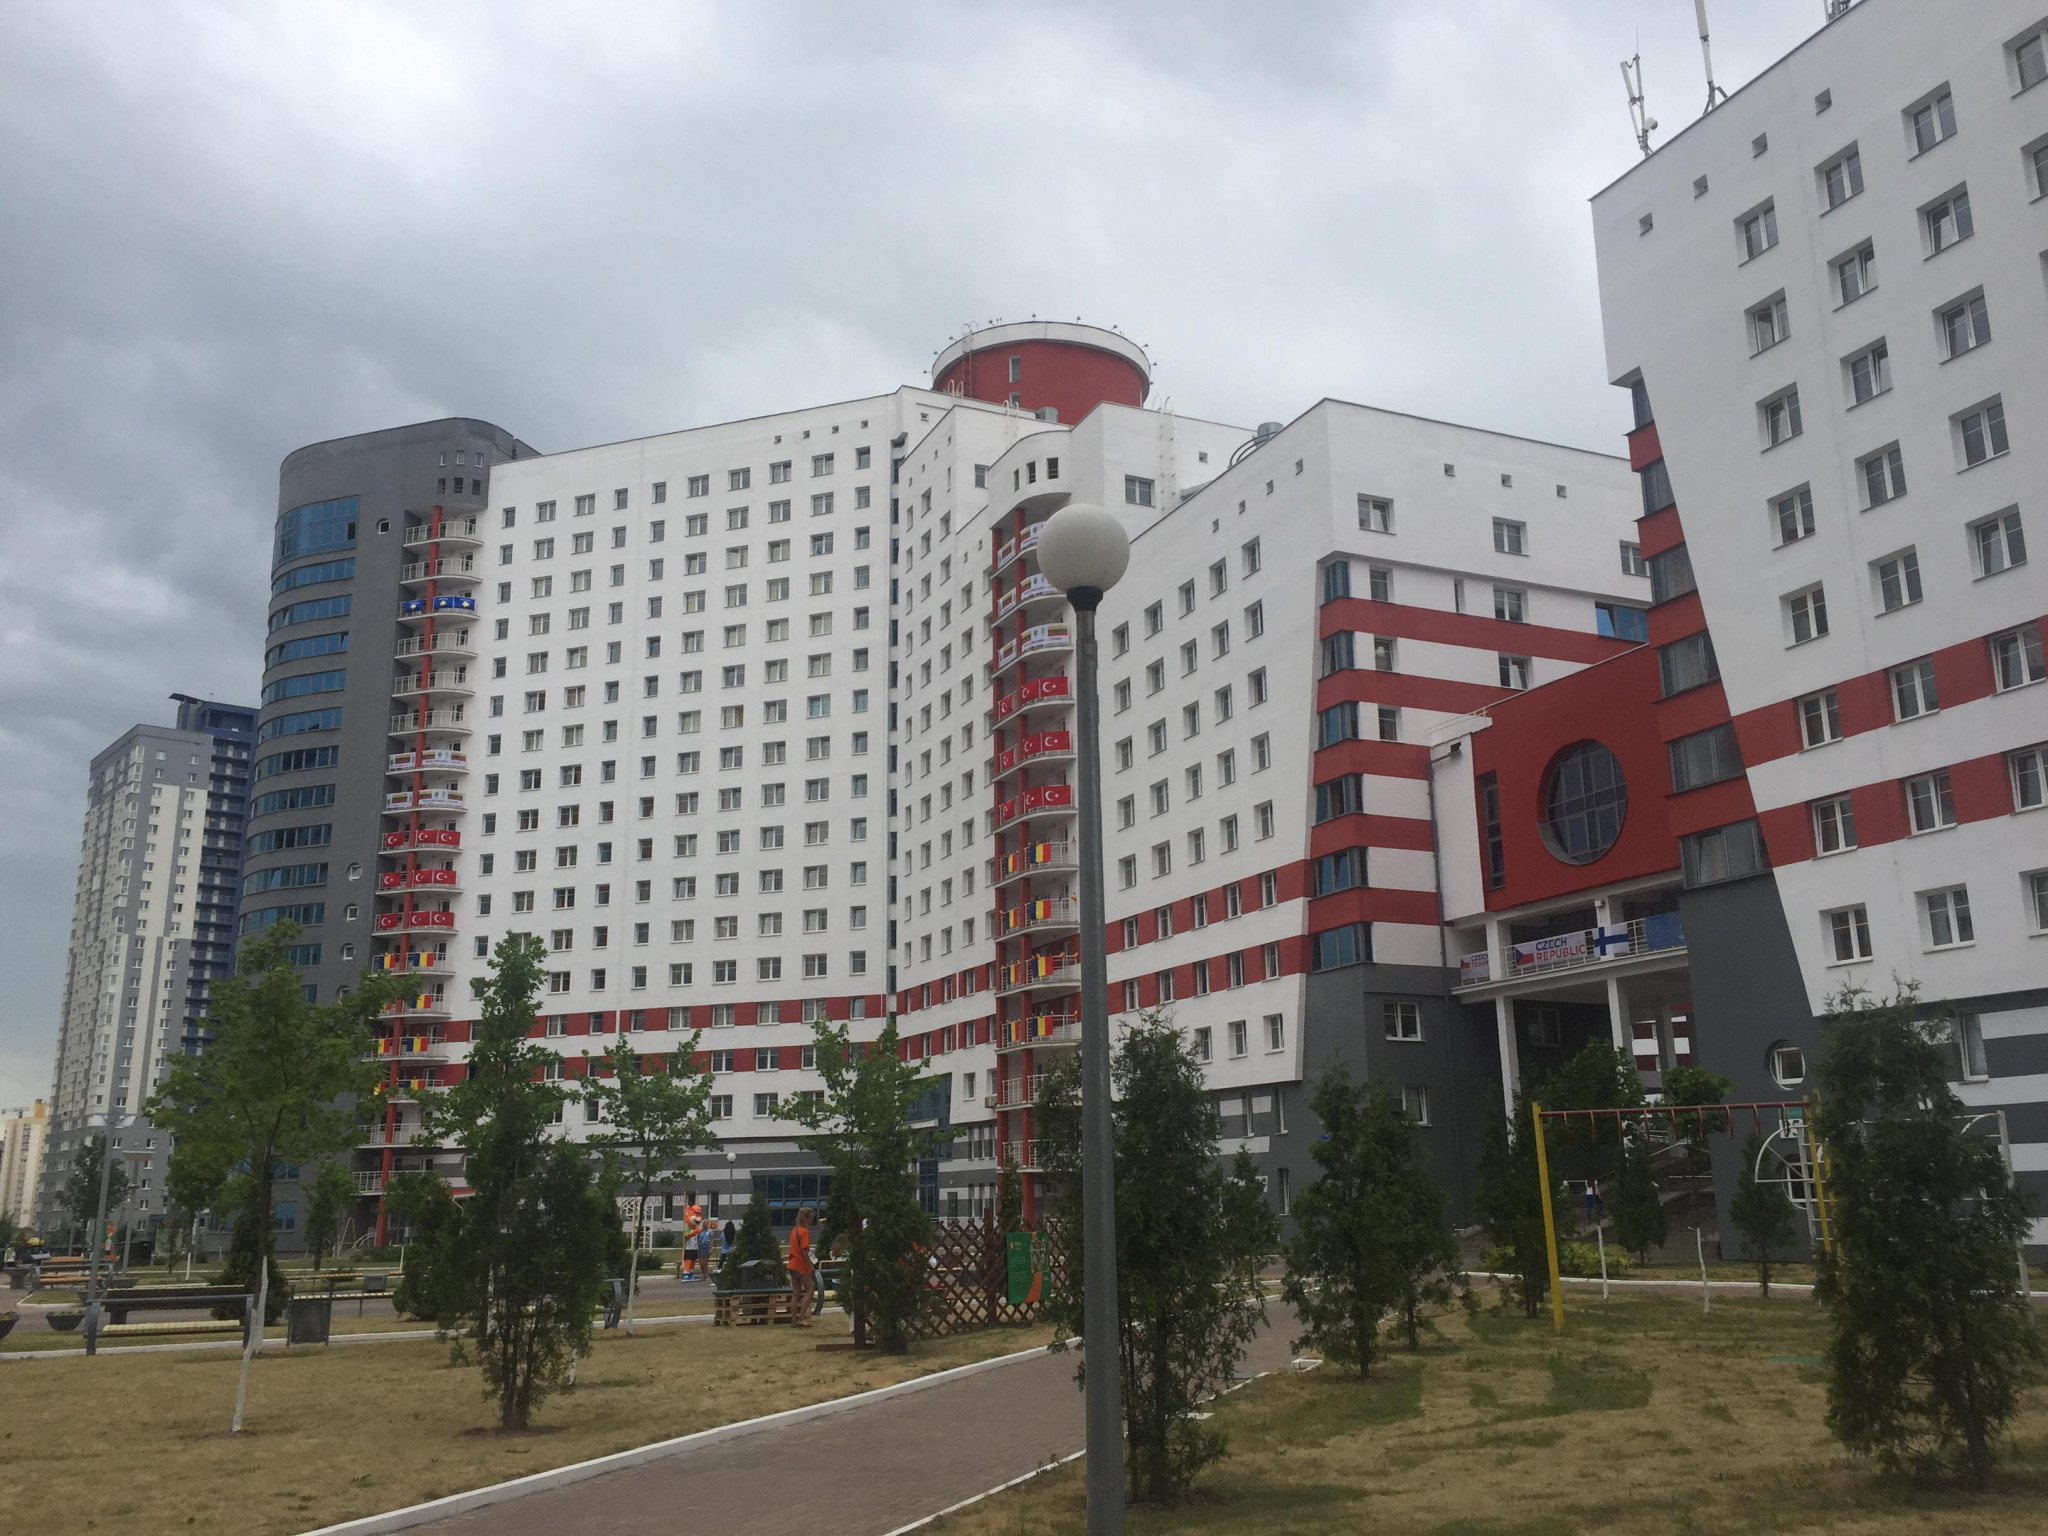 The Minsk 2019 Athletes' Village has reportedly received positive feedback ©ITG